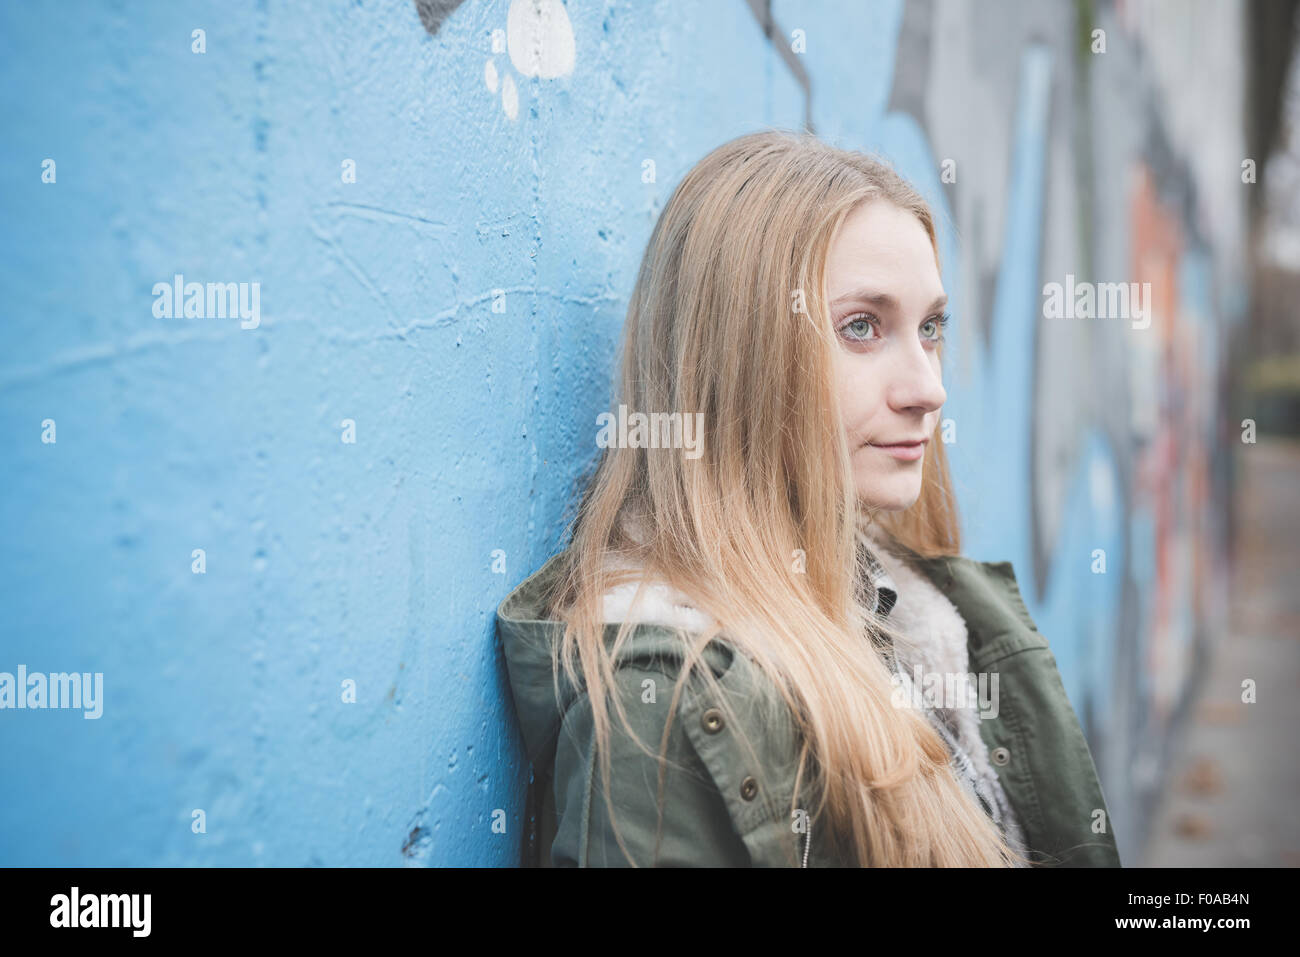 Young woman leaning against graffiti wall Stock Photo